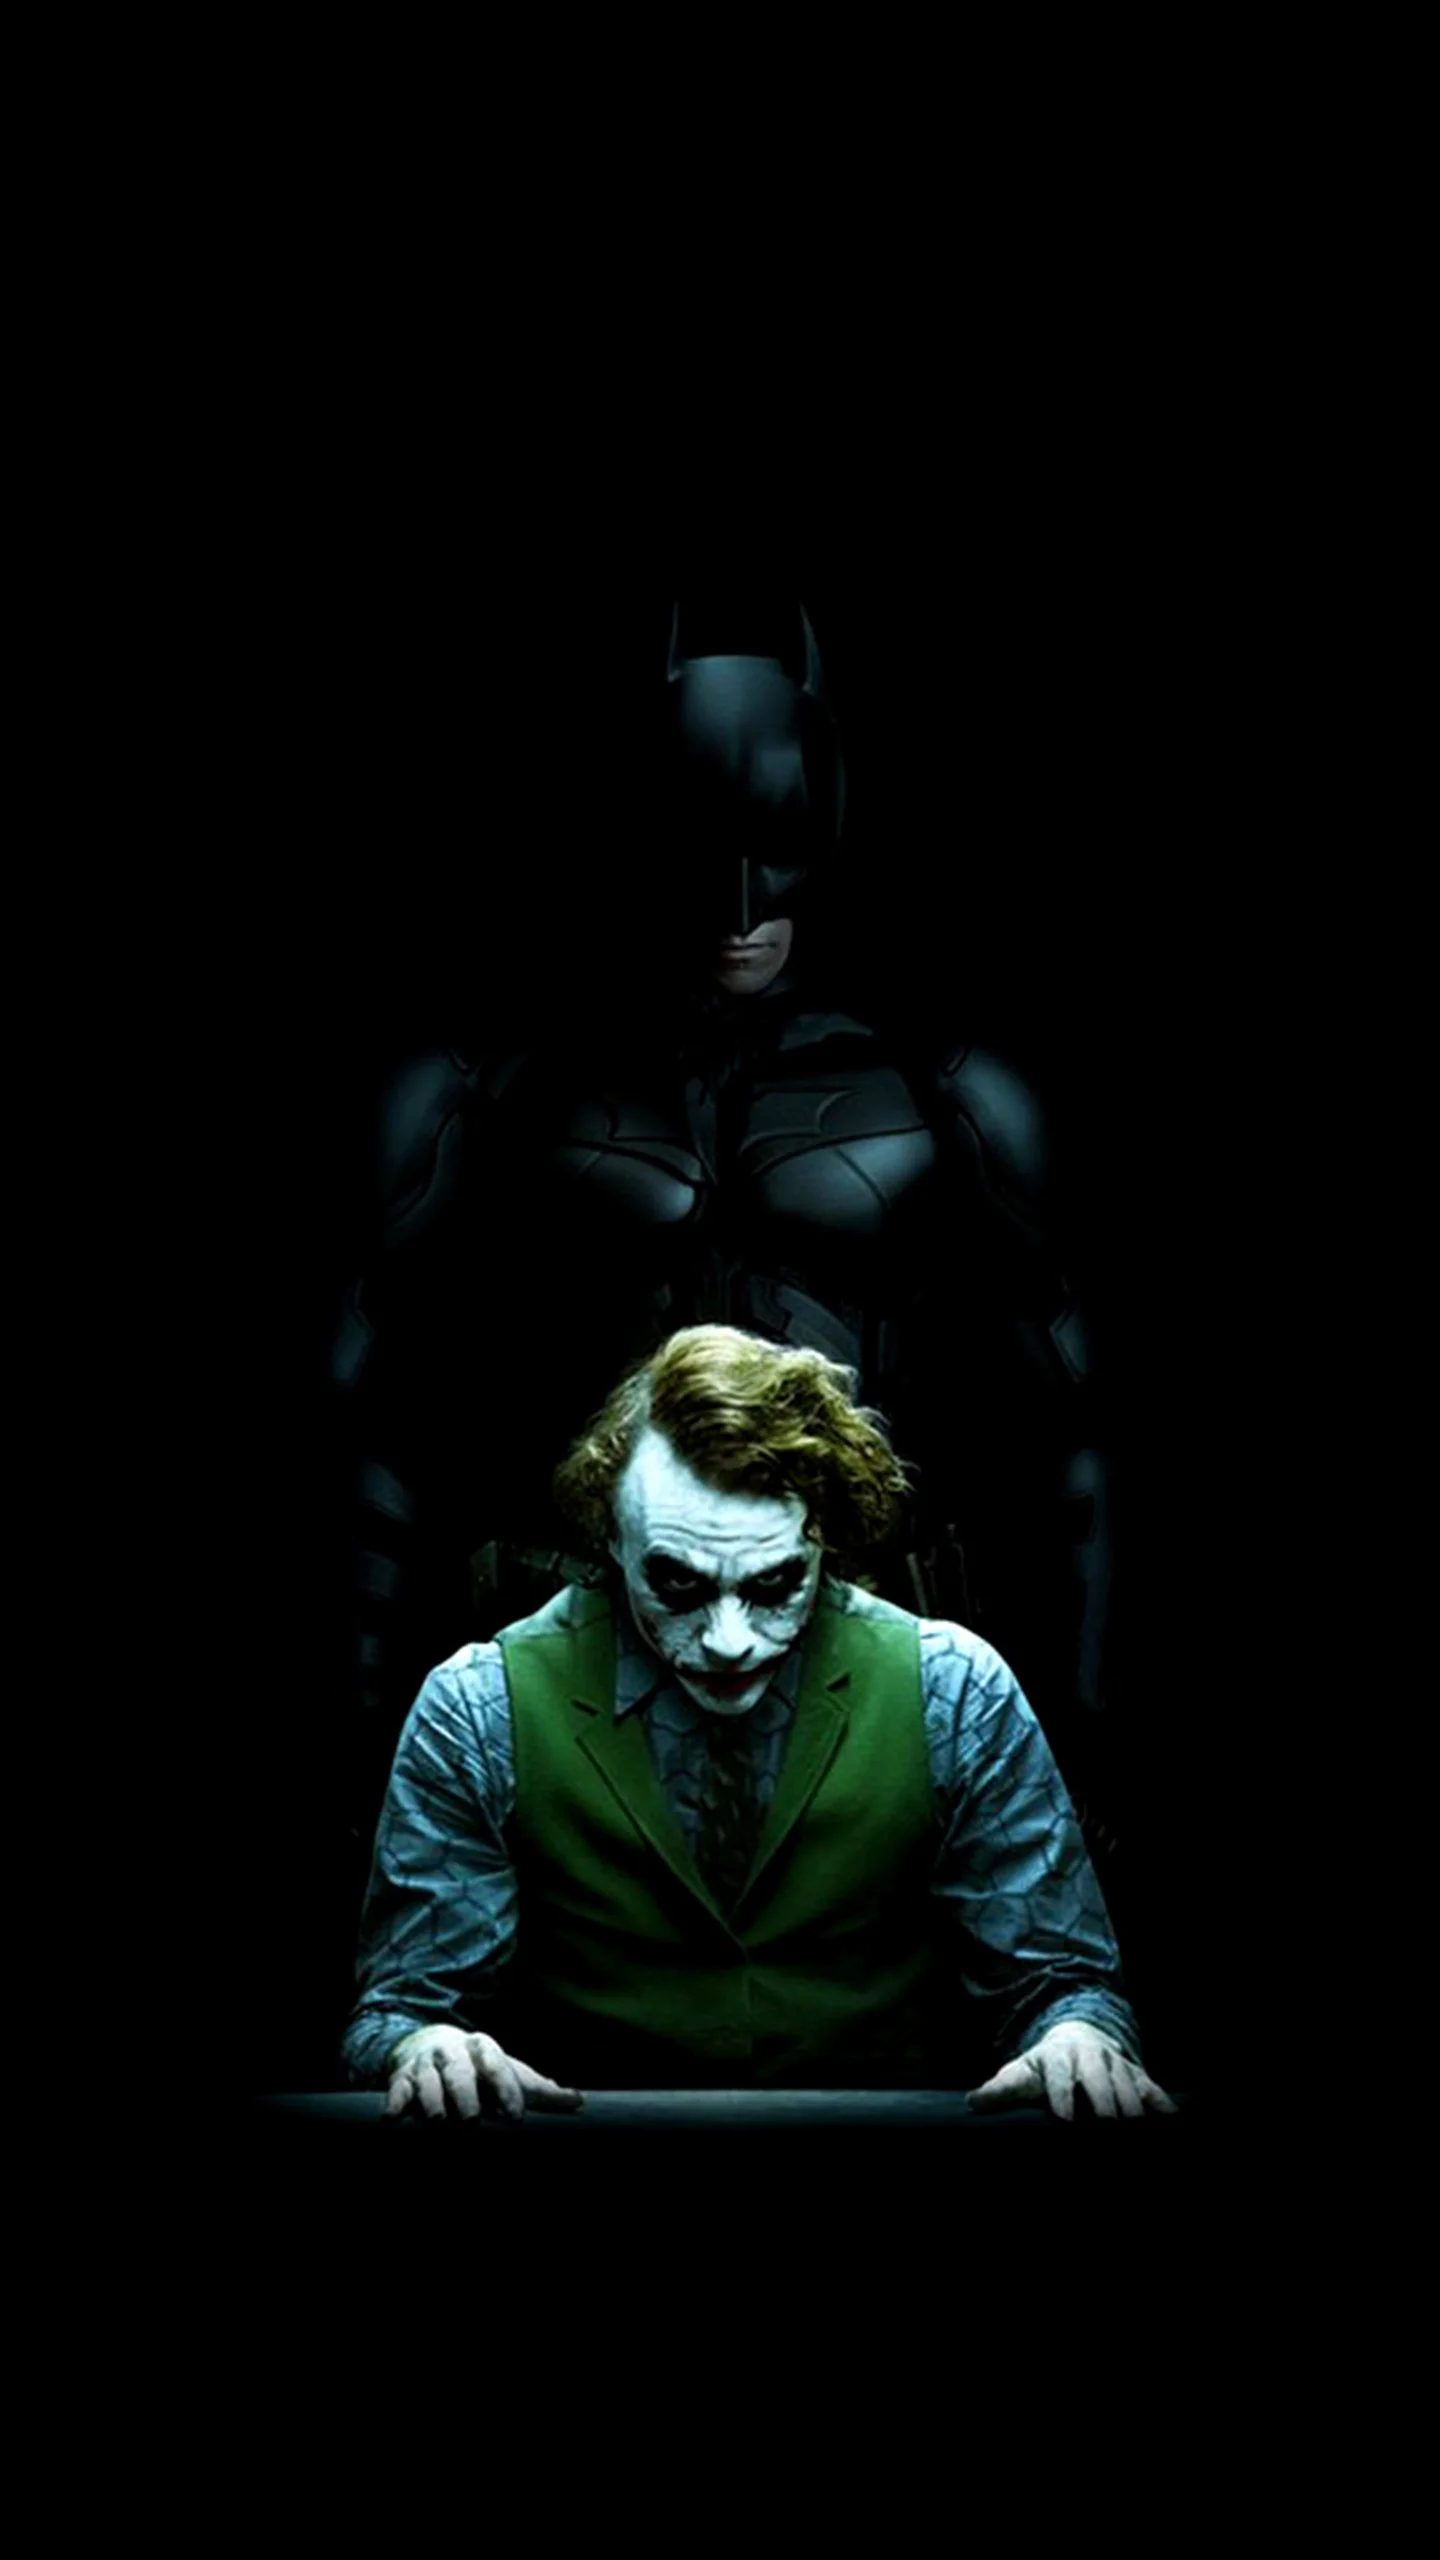 Batman and Joker – The Dark Knight . Find this Pin and more on Amoled Lockscreen Homescreen Wallpapers